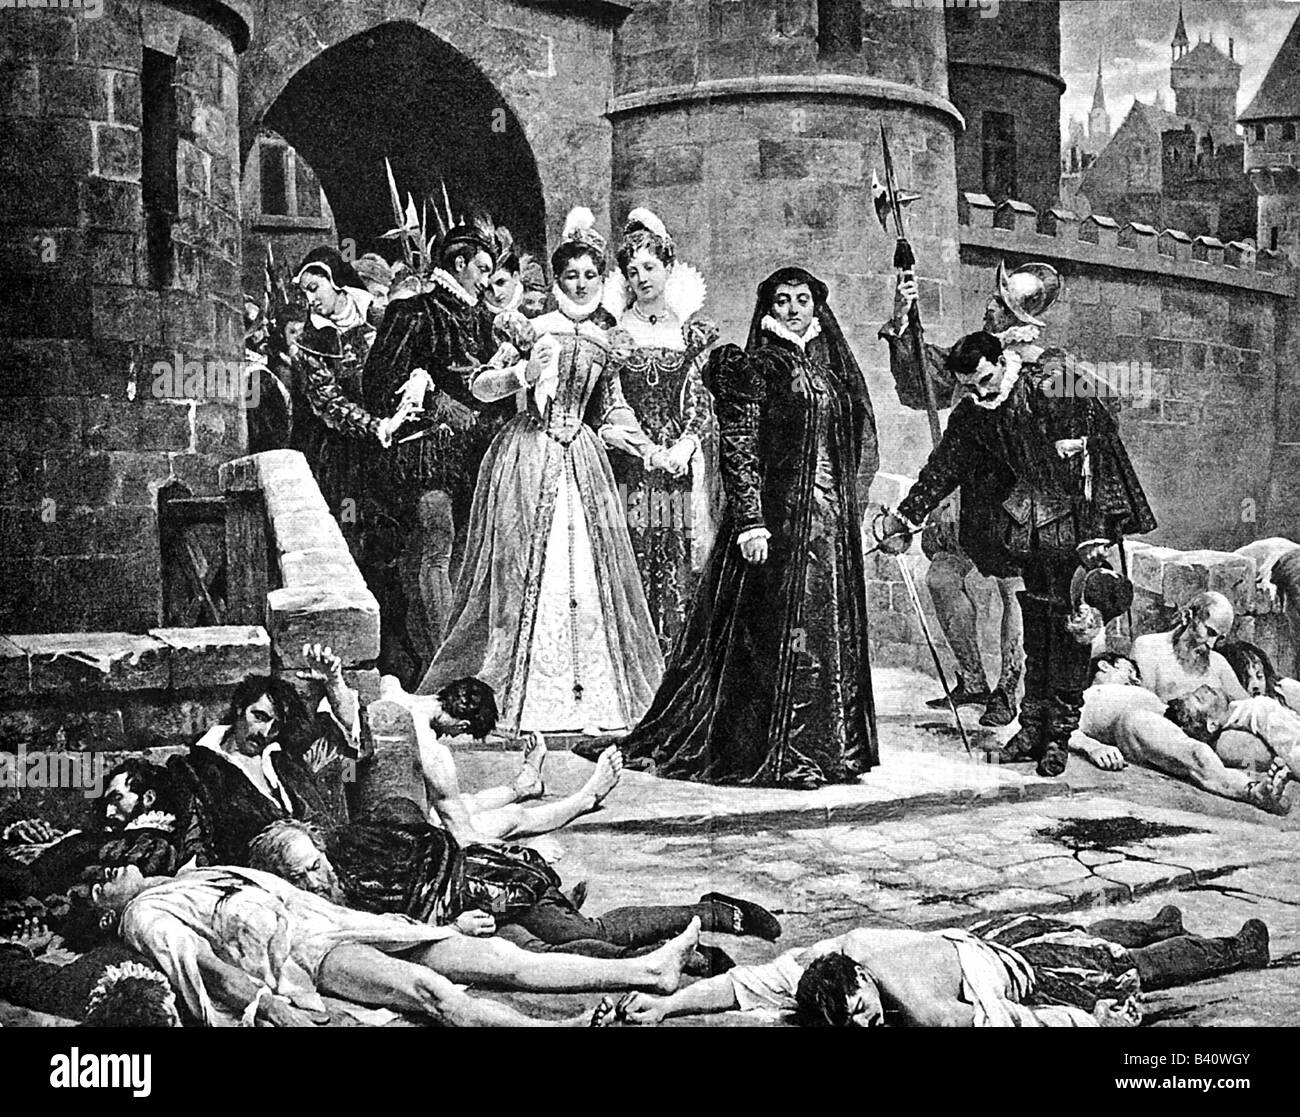 Catherine di Medici, 13.4.1519 - 5.1.1589, Queen of France 31.3.1547 - 10.7.1559, looks at victims of St. Bartholomew's Day Massacre, Paris 24.8.1572, historical picture, engraving after painting by E. Debat-Ponsan, 19th century, Stock Photo